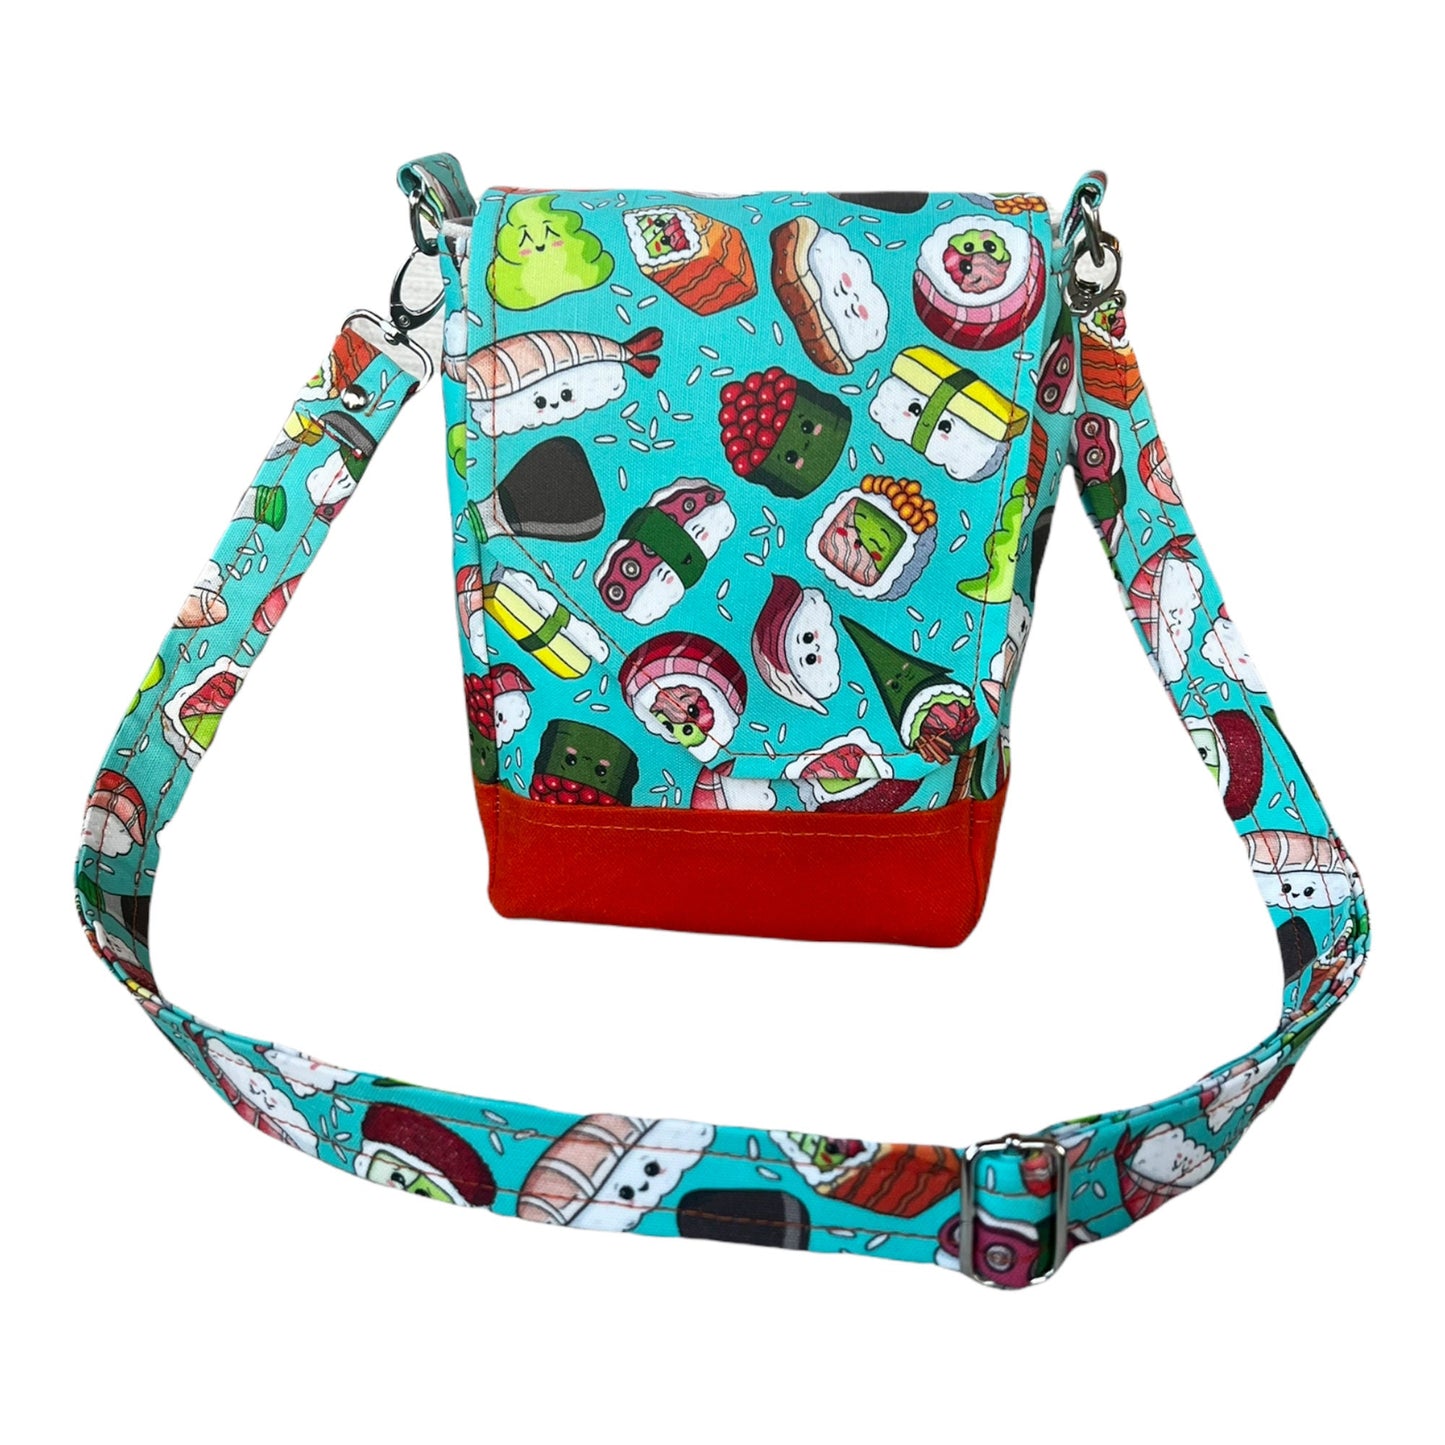 Kawaii sushi crossbody bag built for a day on the town! It has an adjustable strap, two pockets, main compartment and magnetic closure.